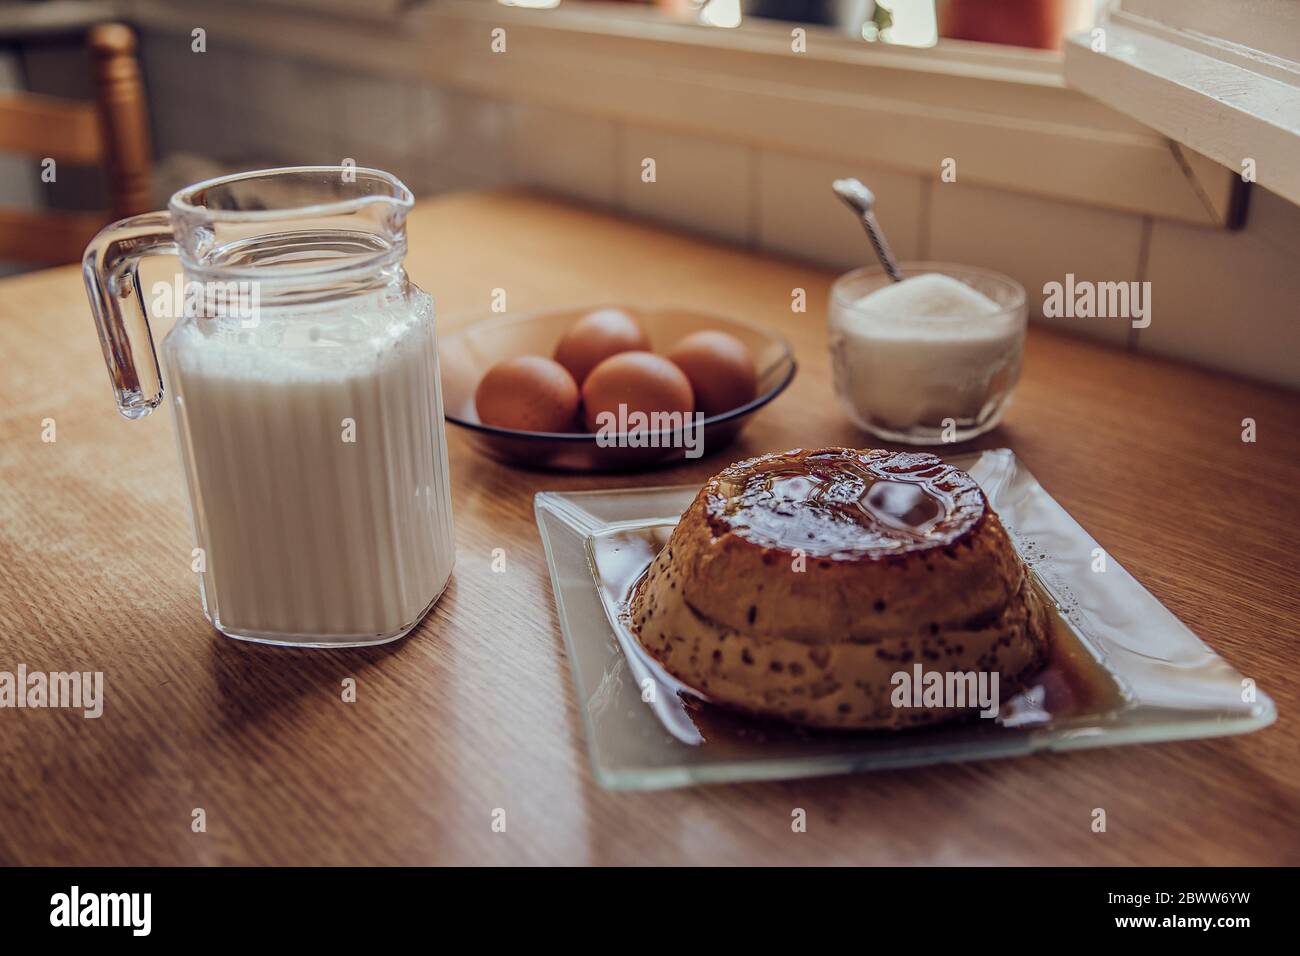 Ready-to-eat flan and its ingredients Stock Photo